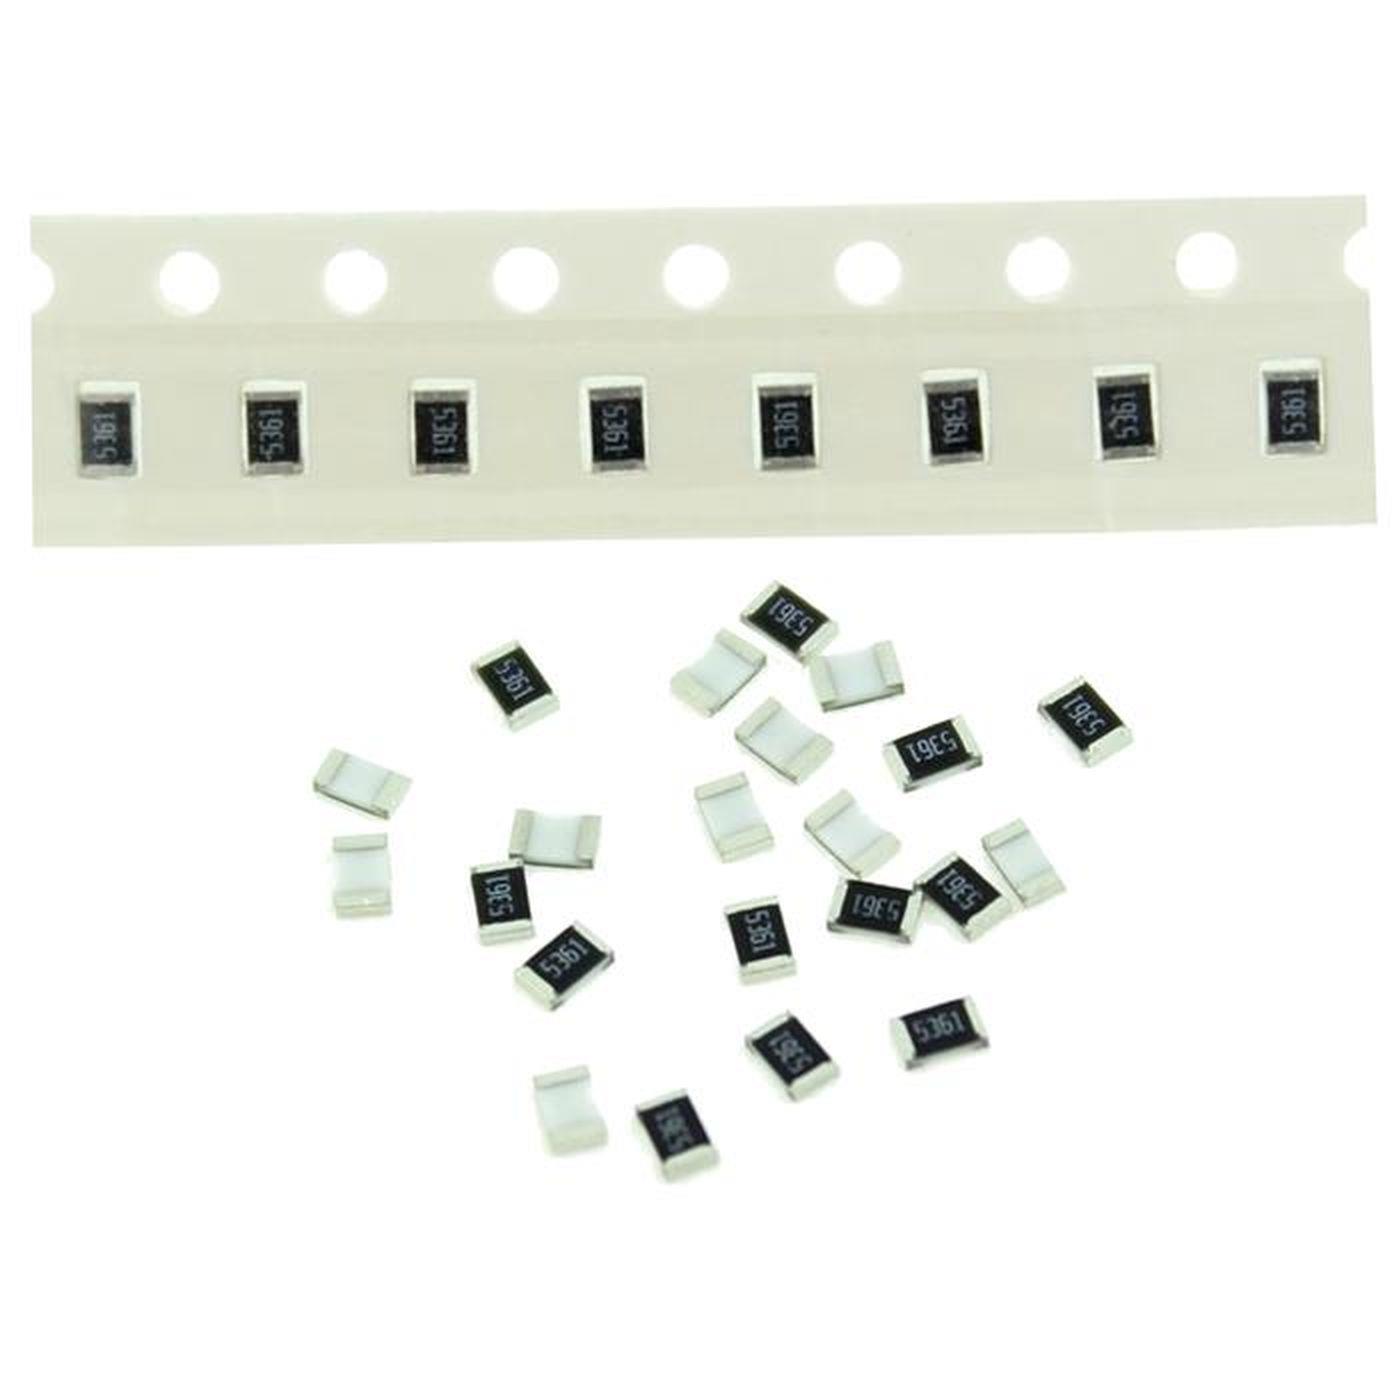 5000x SMD Widerstand 6,8MOhm ±5% 0805 0,125W NSE CR05T05NJ6M8